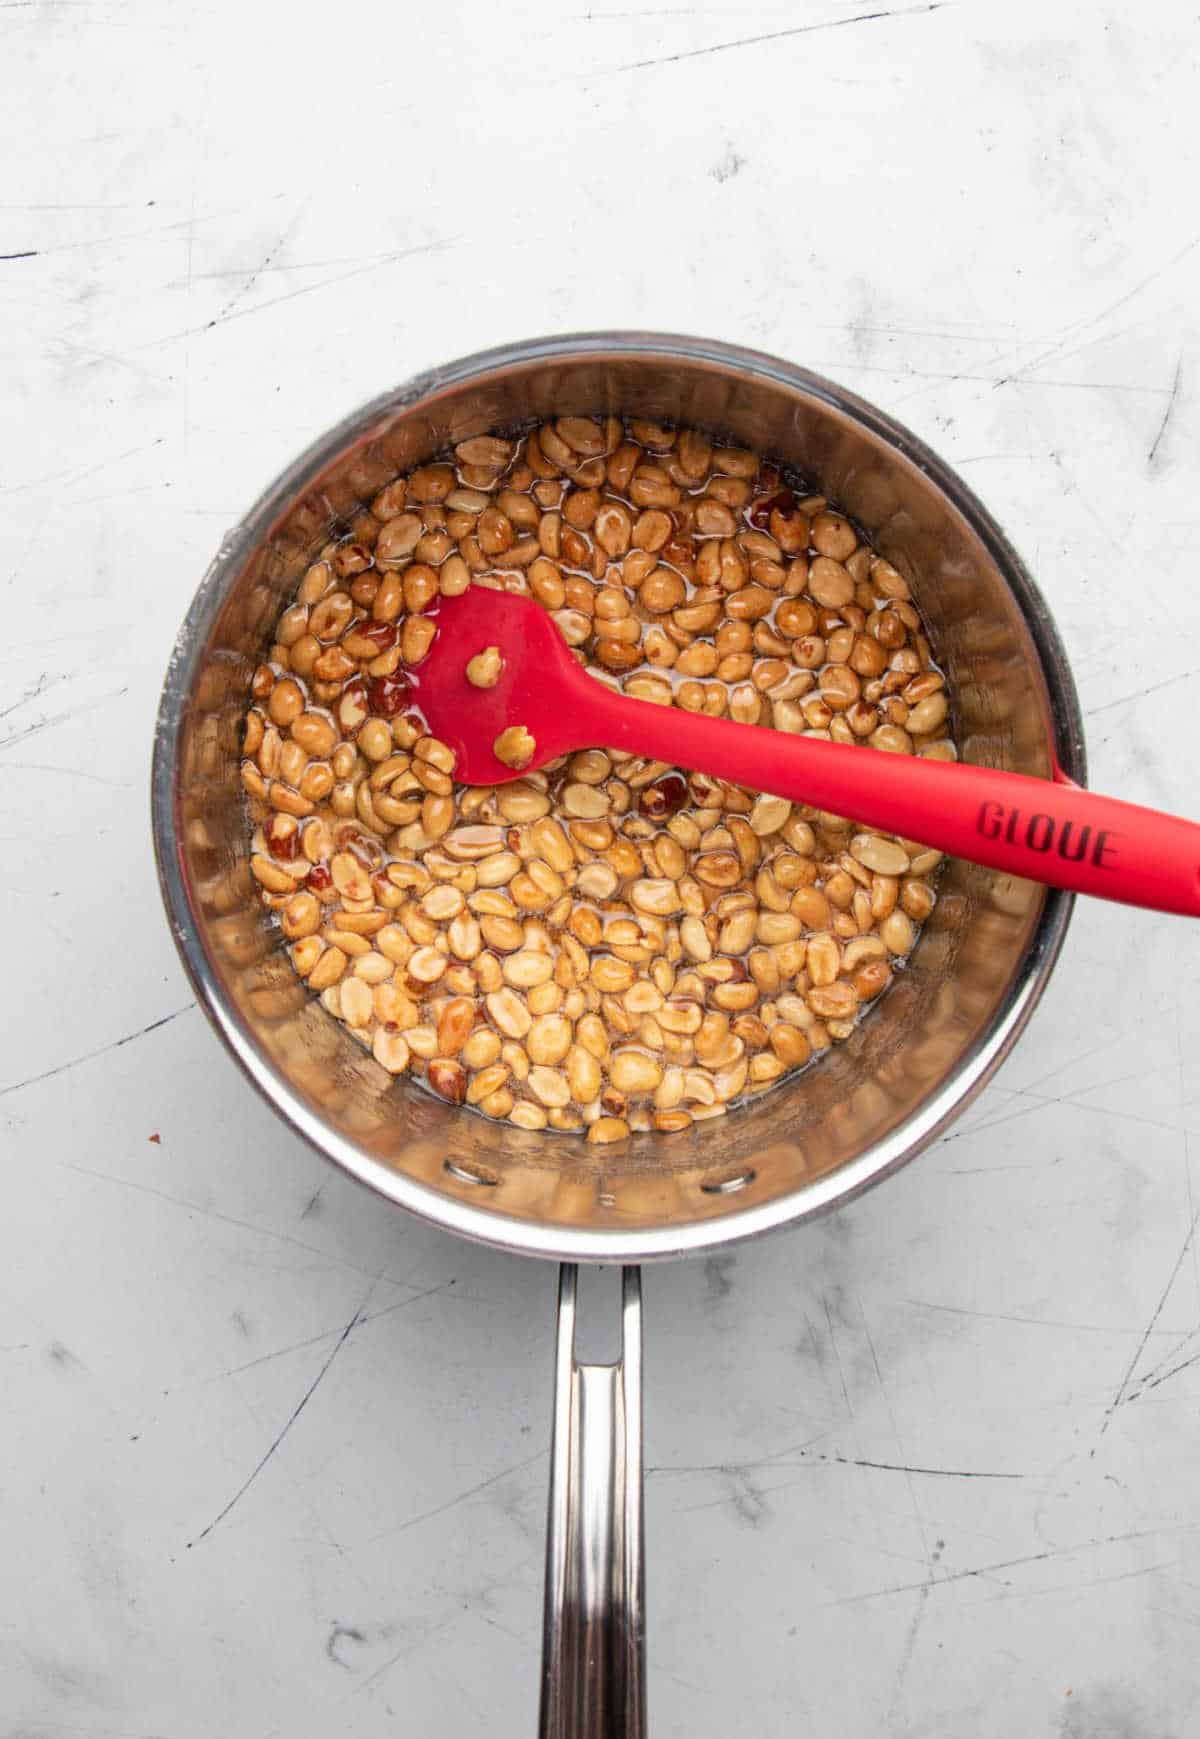 Peanuts in corn syrup mixture in a saucepan.